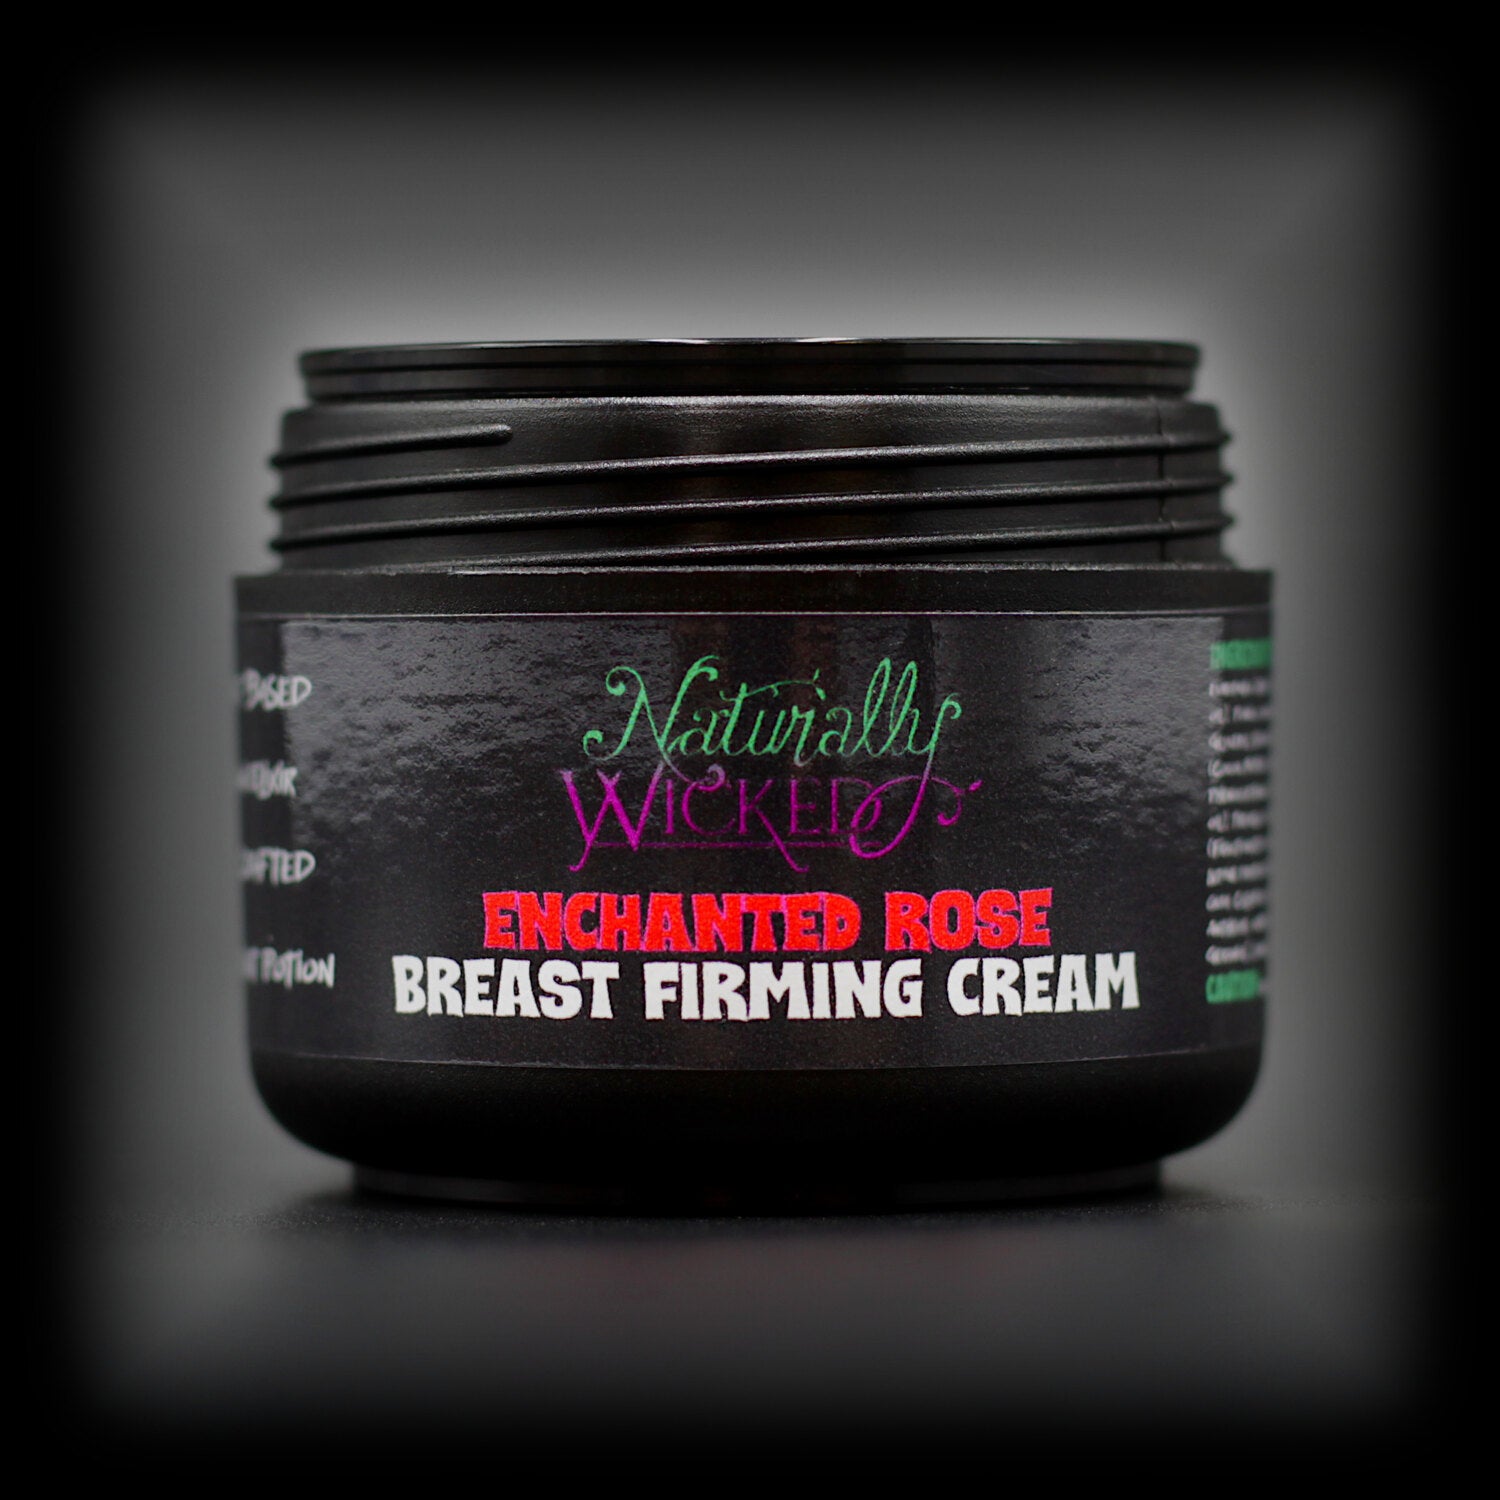 Naturally Wicked Enchanted Rose Breast Firming Cream In Black Luxury Container With Sealed Screw Top Lid